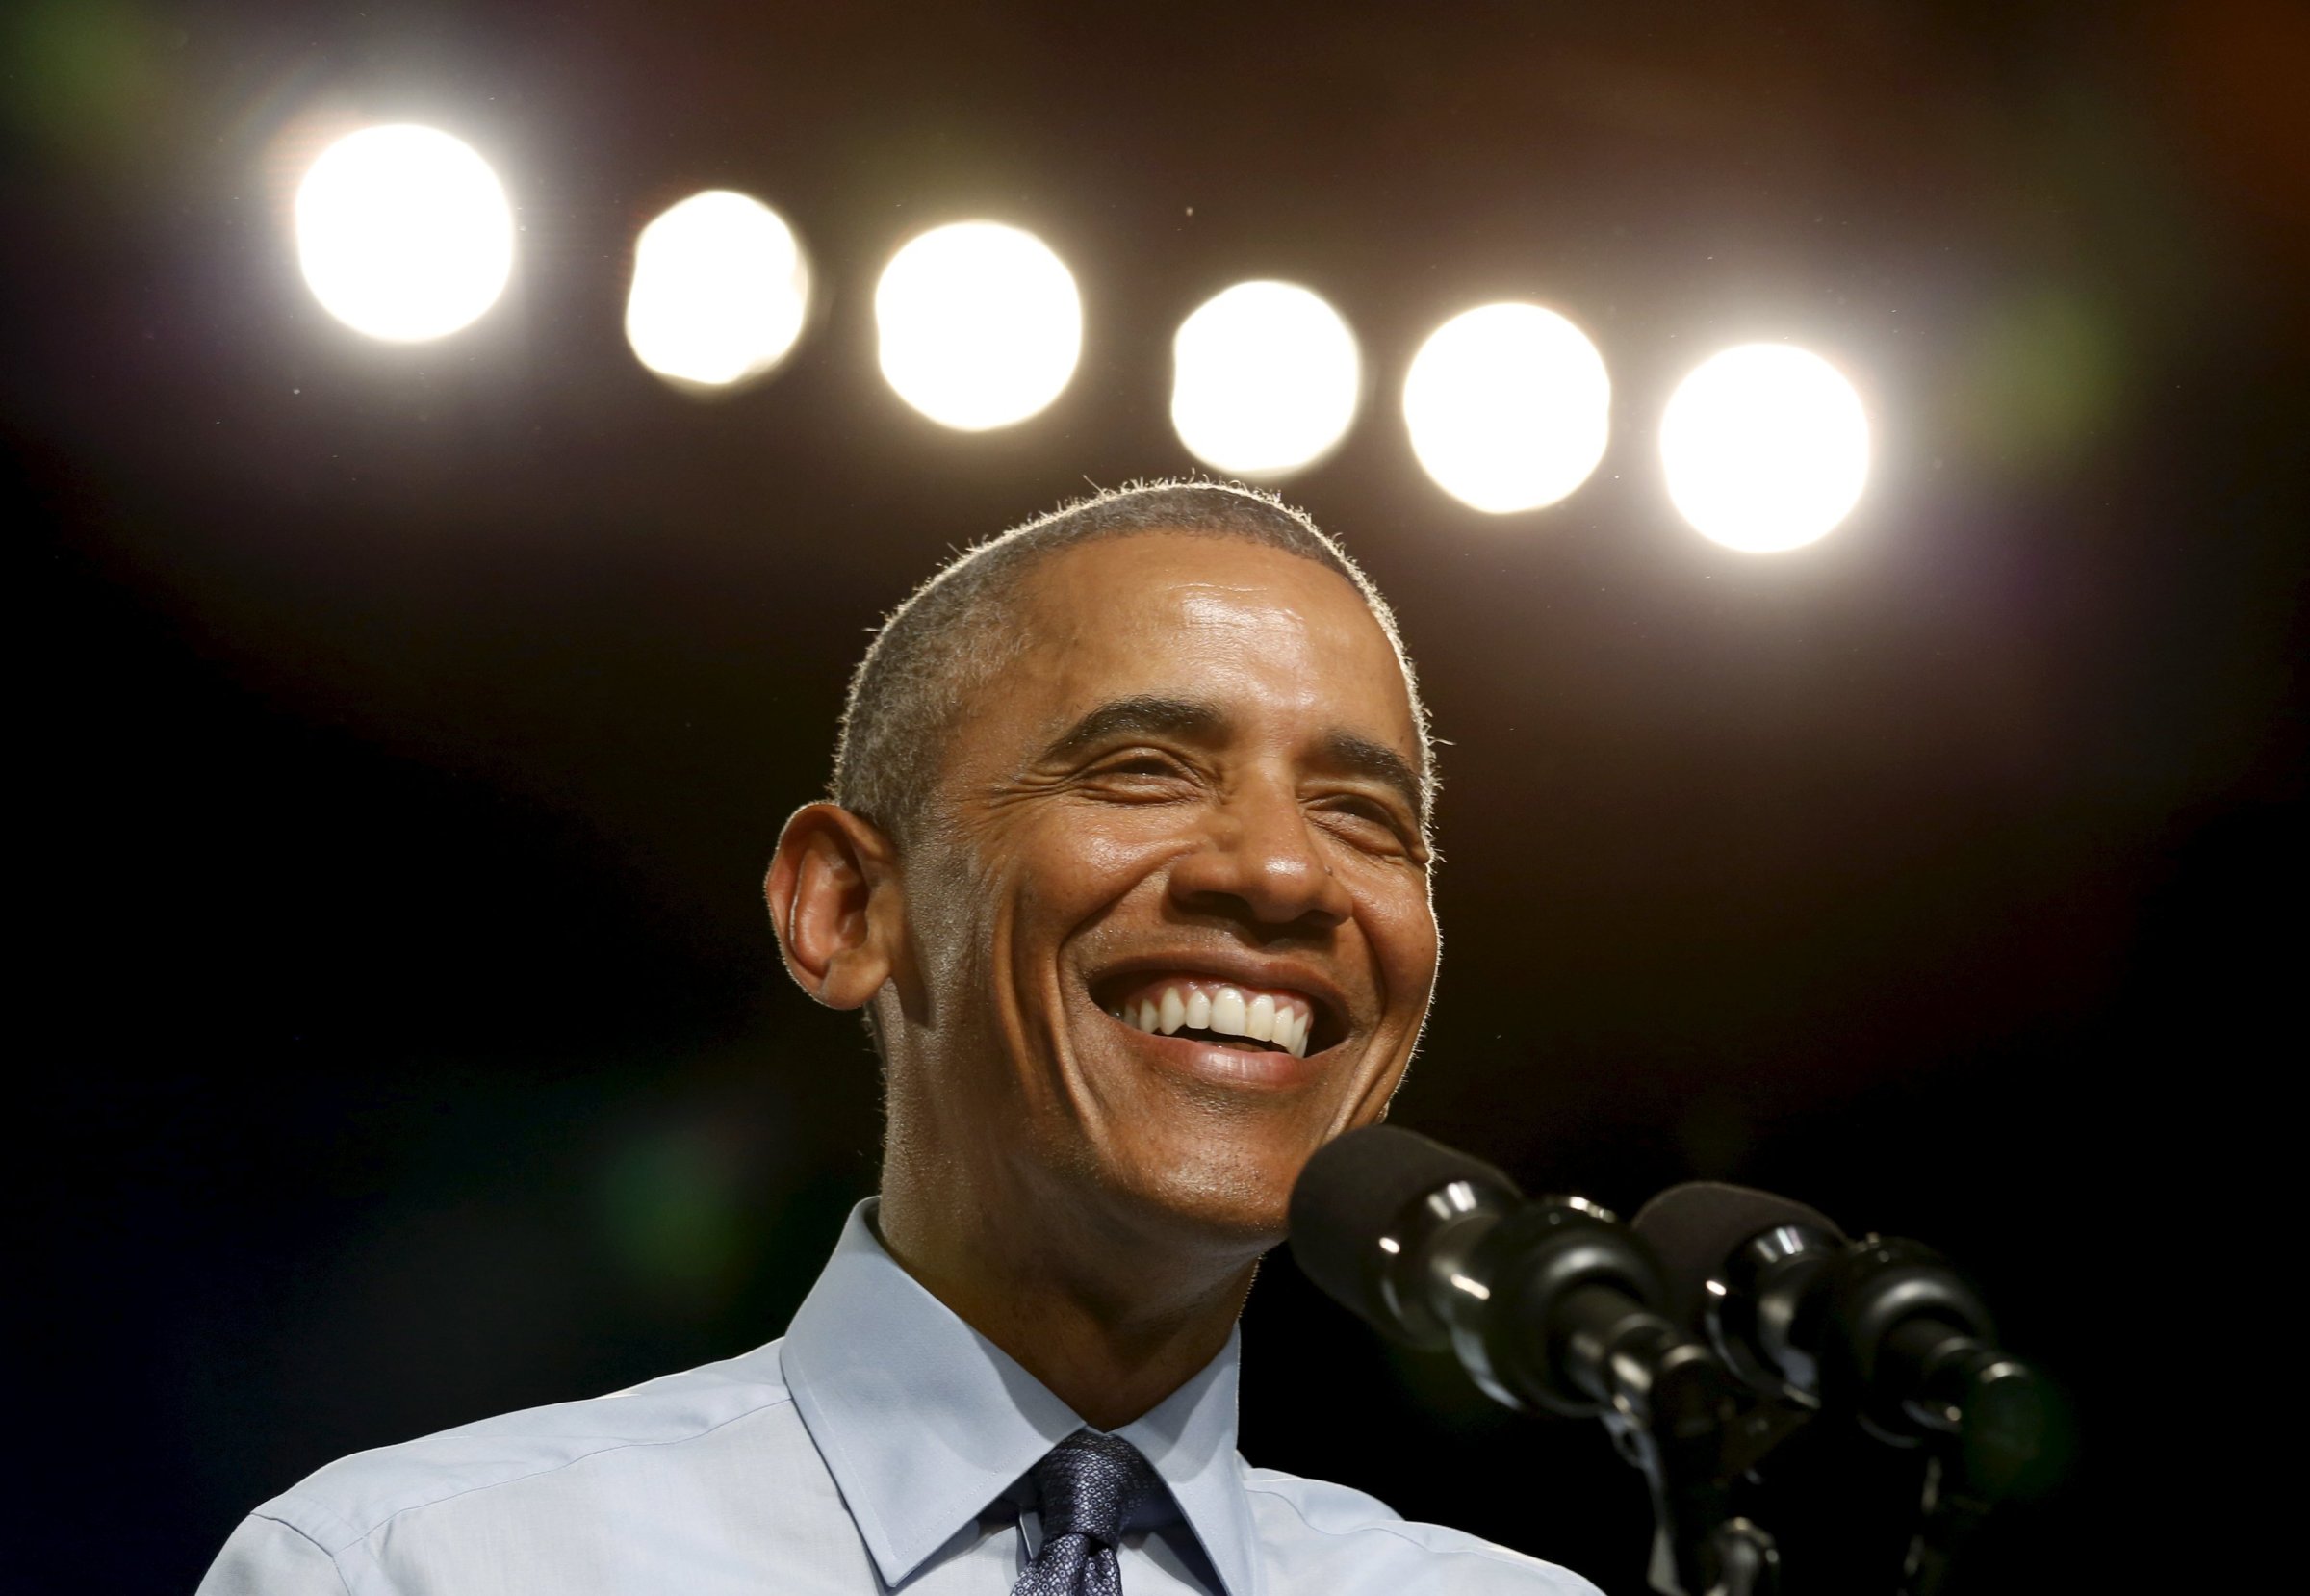 U.S. President Barack Obama smiles while speaking during a visit to Macomb  Community College in Warren